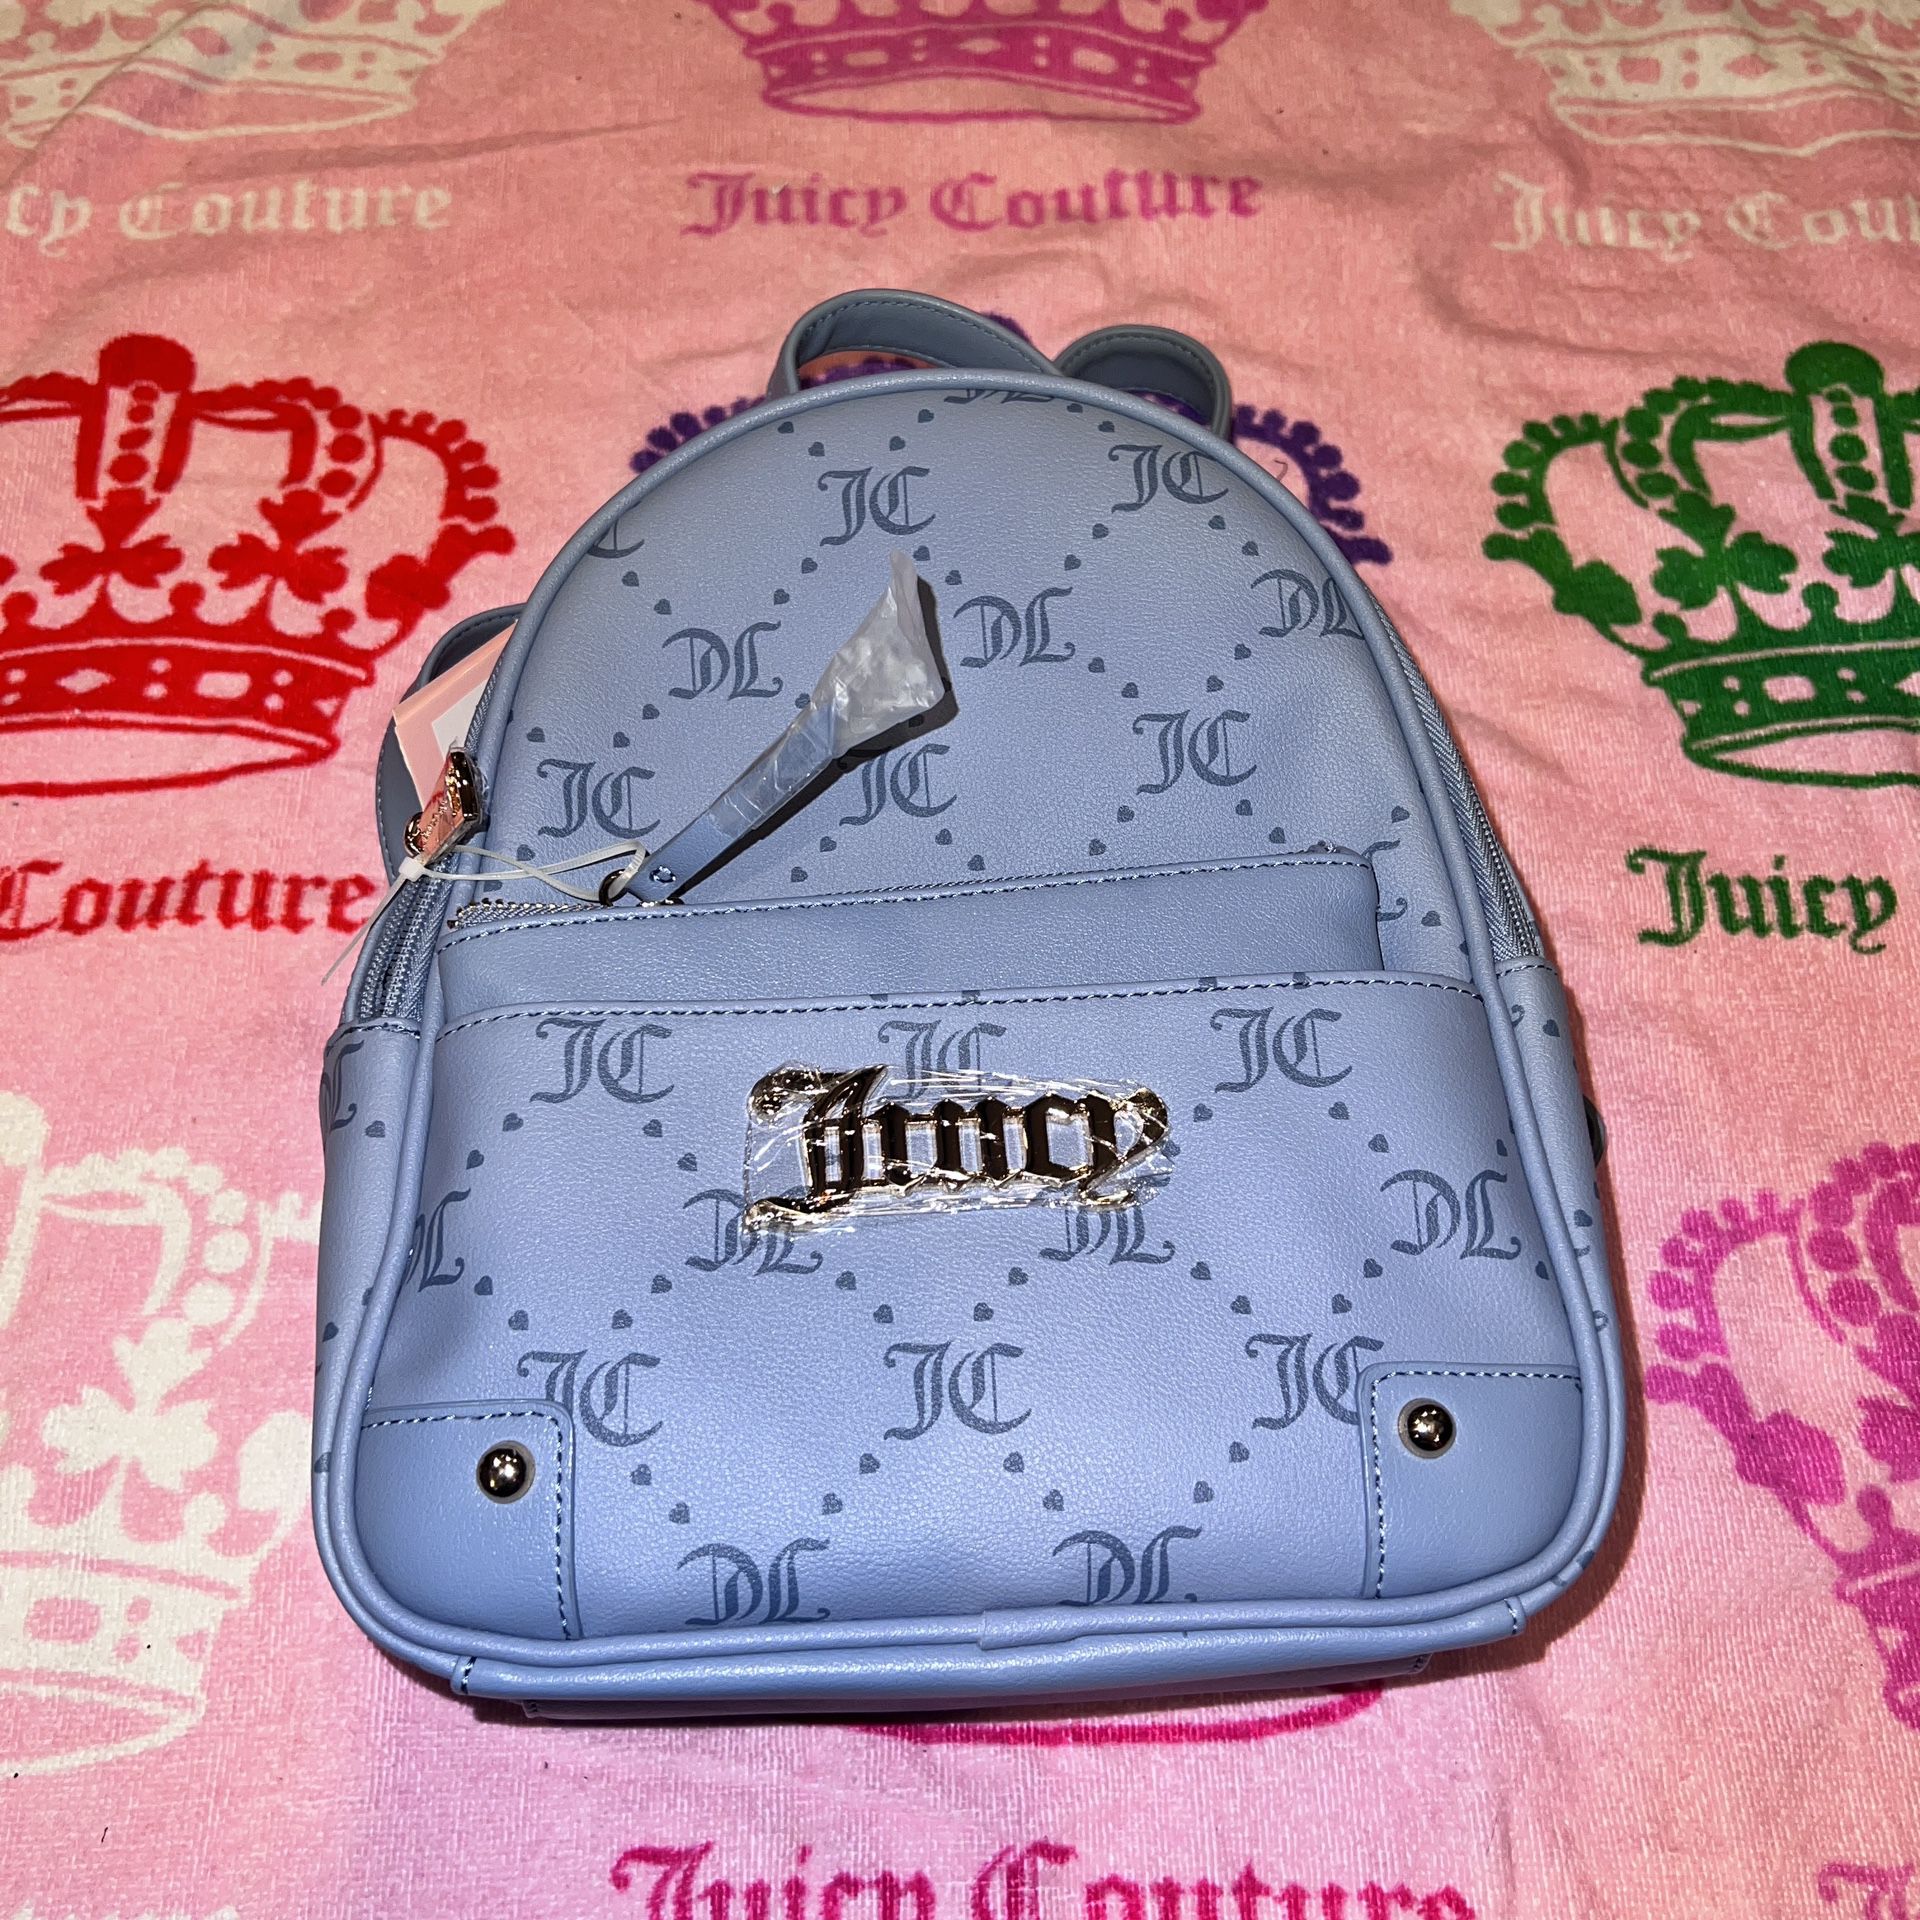 New Blue Juicy Couture Mini Backpack + Pouch NWT Purse Bag MSRP $99